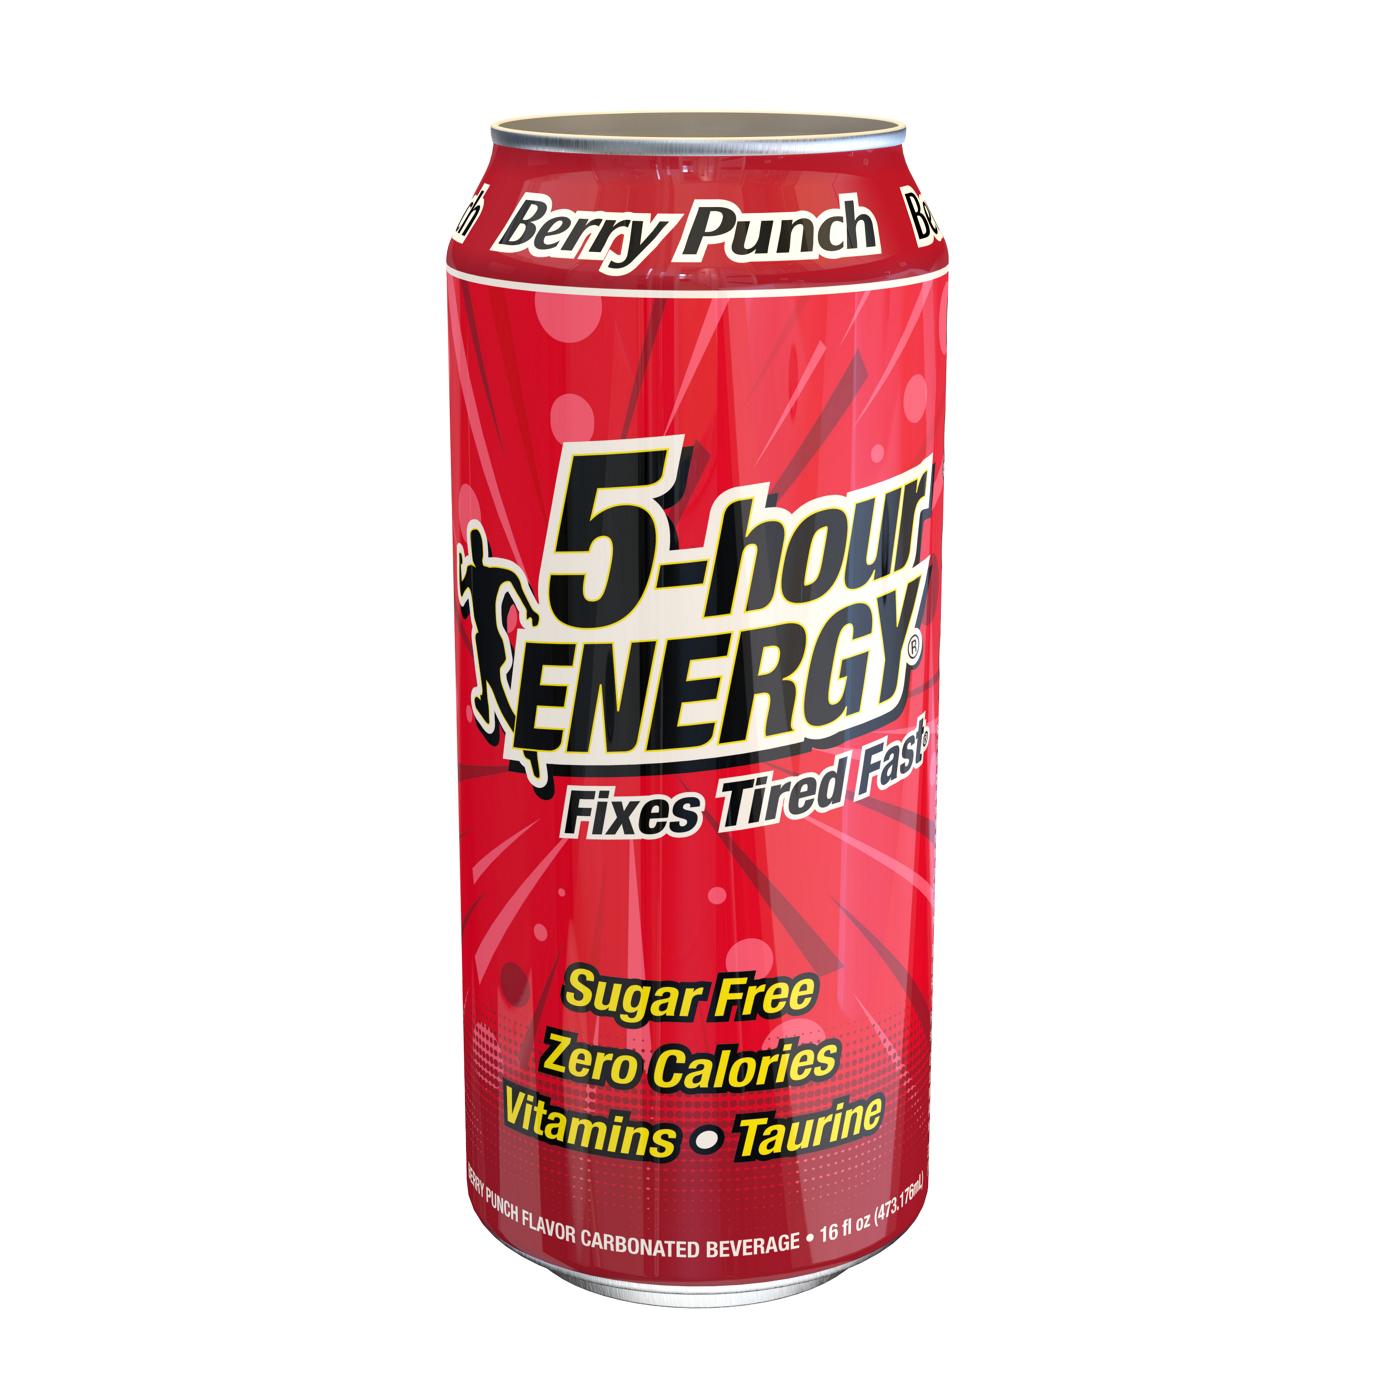 5-hour ENERGY Drink - Berry Punch; image 1 of 3